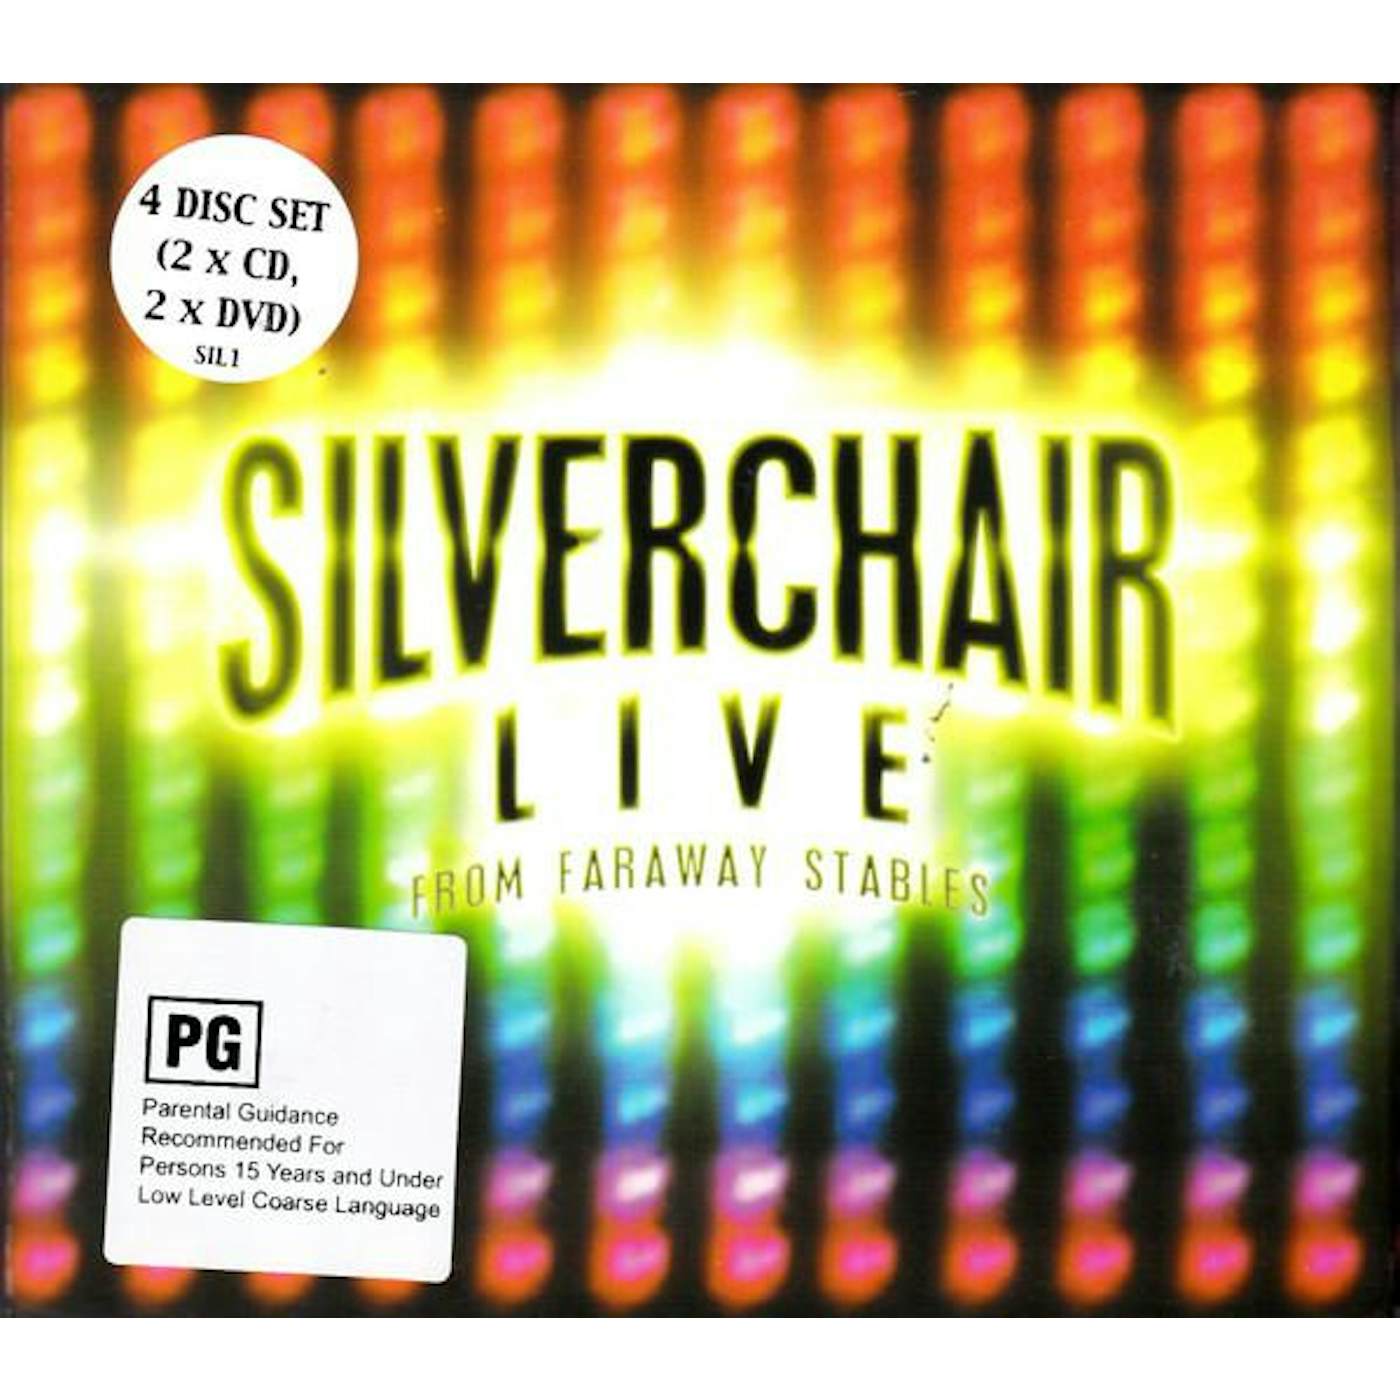 Silverchair LIVE FROM FARAWAY STABLES CD